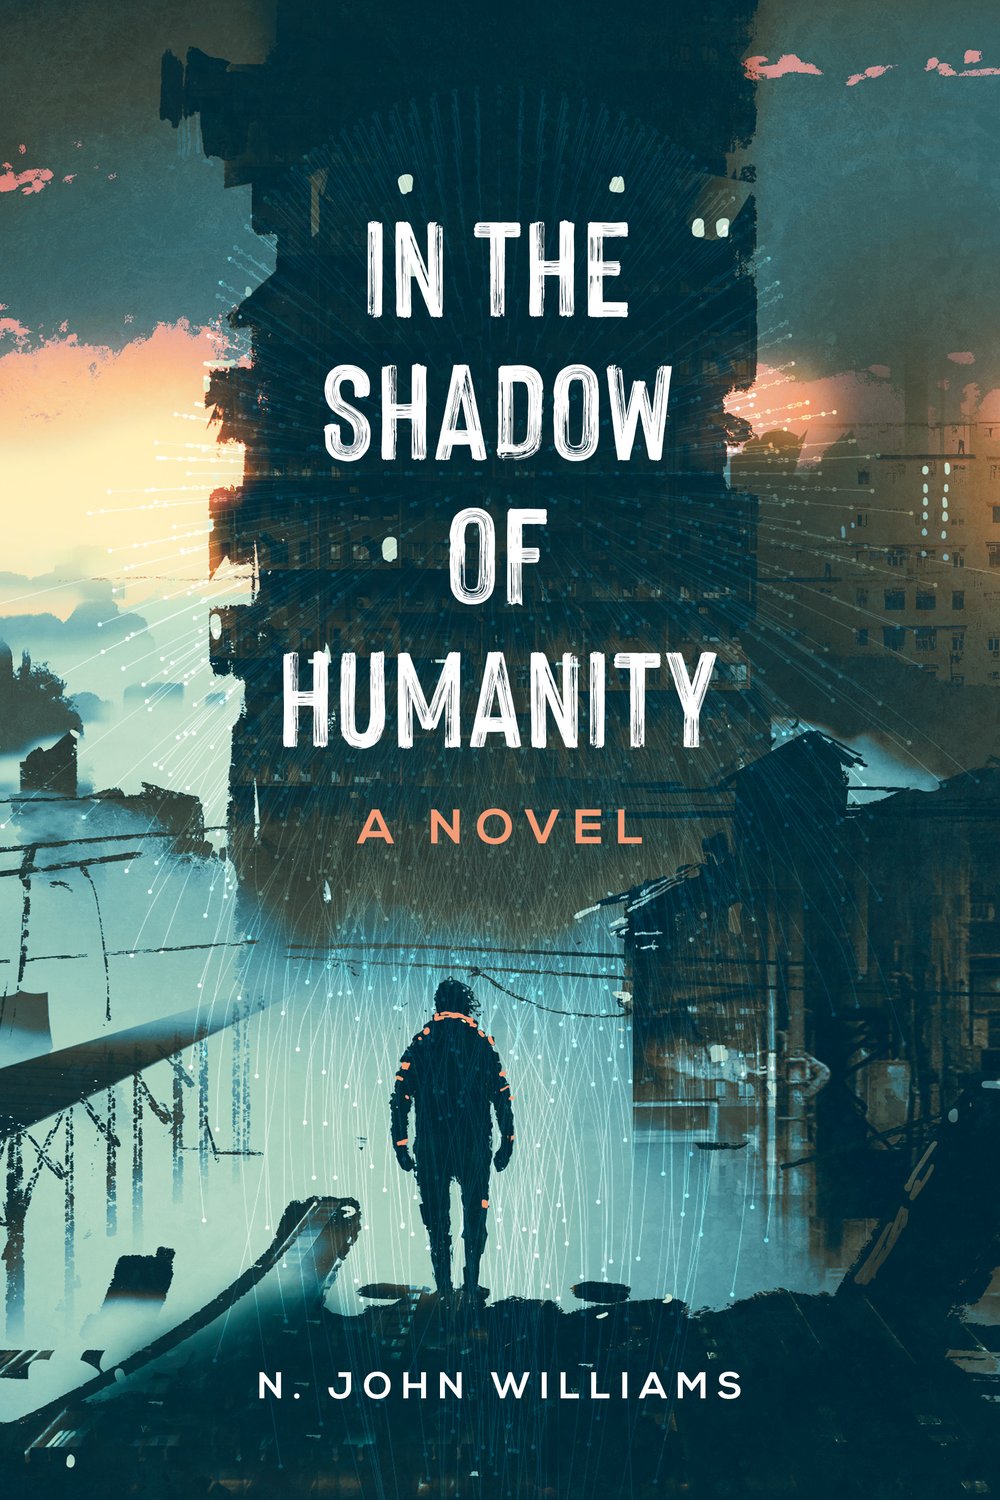 Cover image of the science fiction novel 